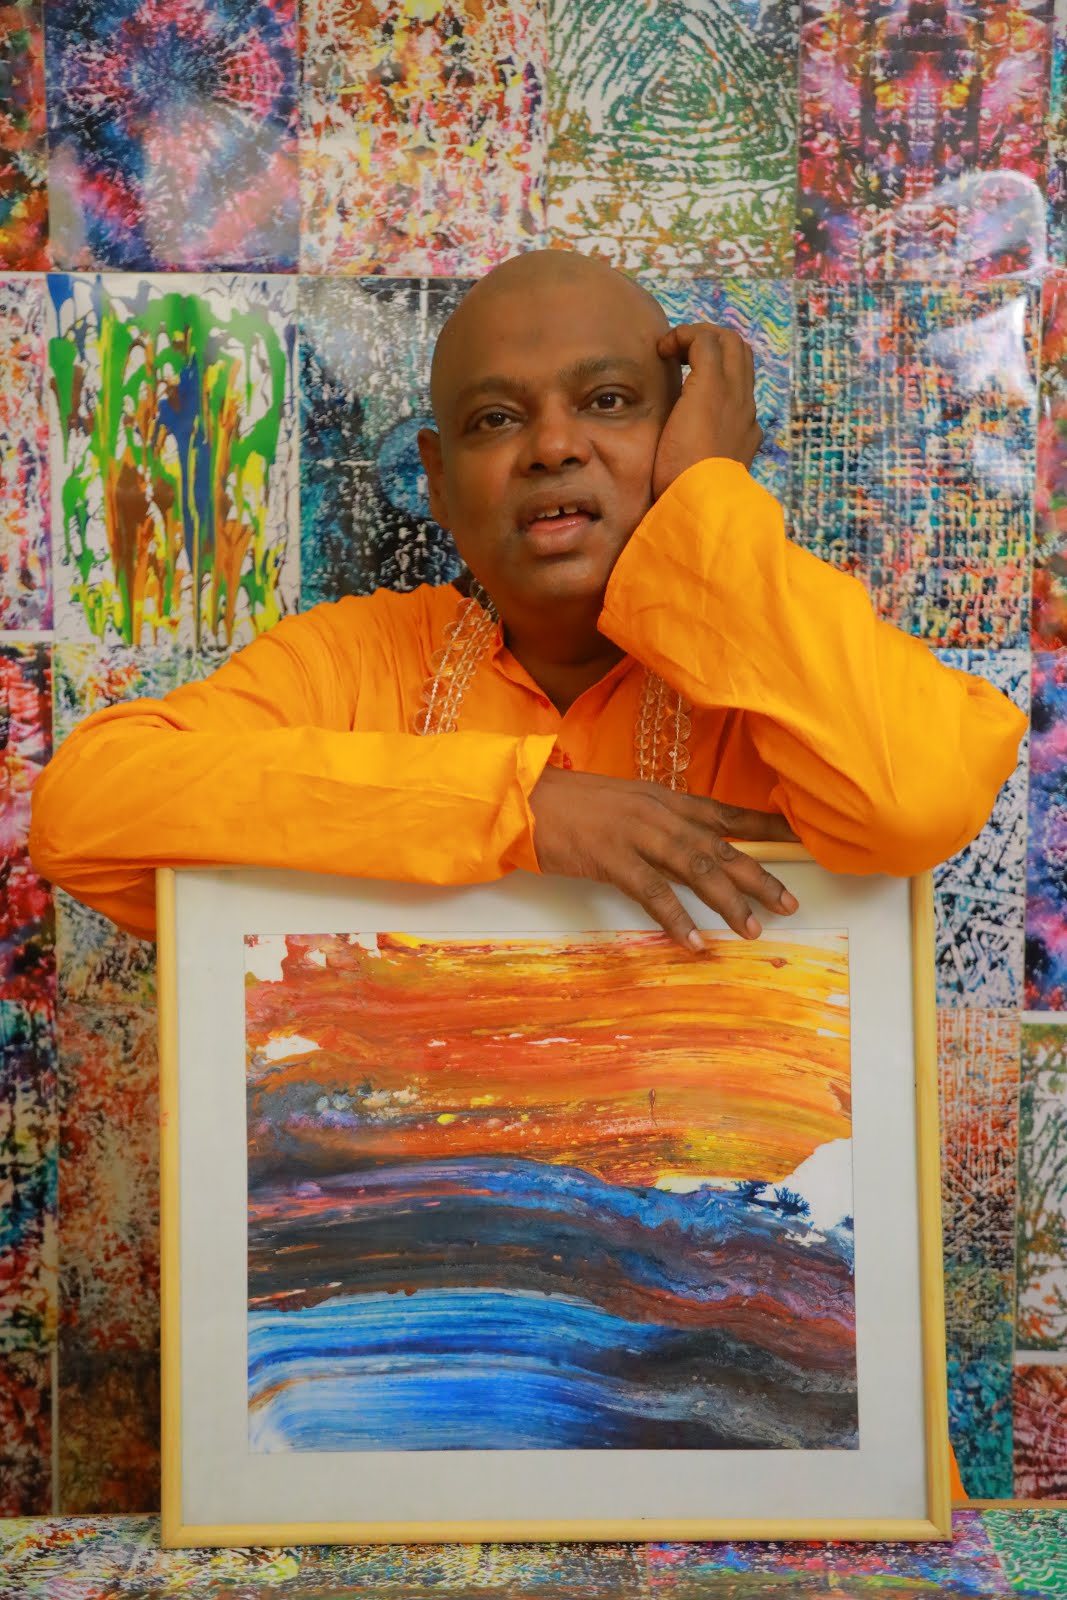 Parijoy Saha with the World's fastest abstract painting.